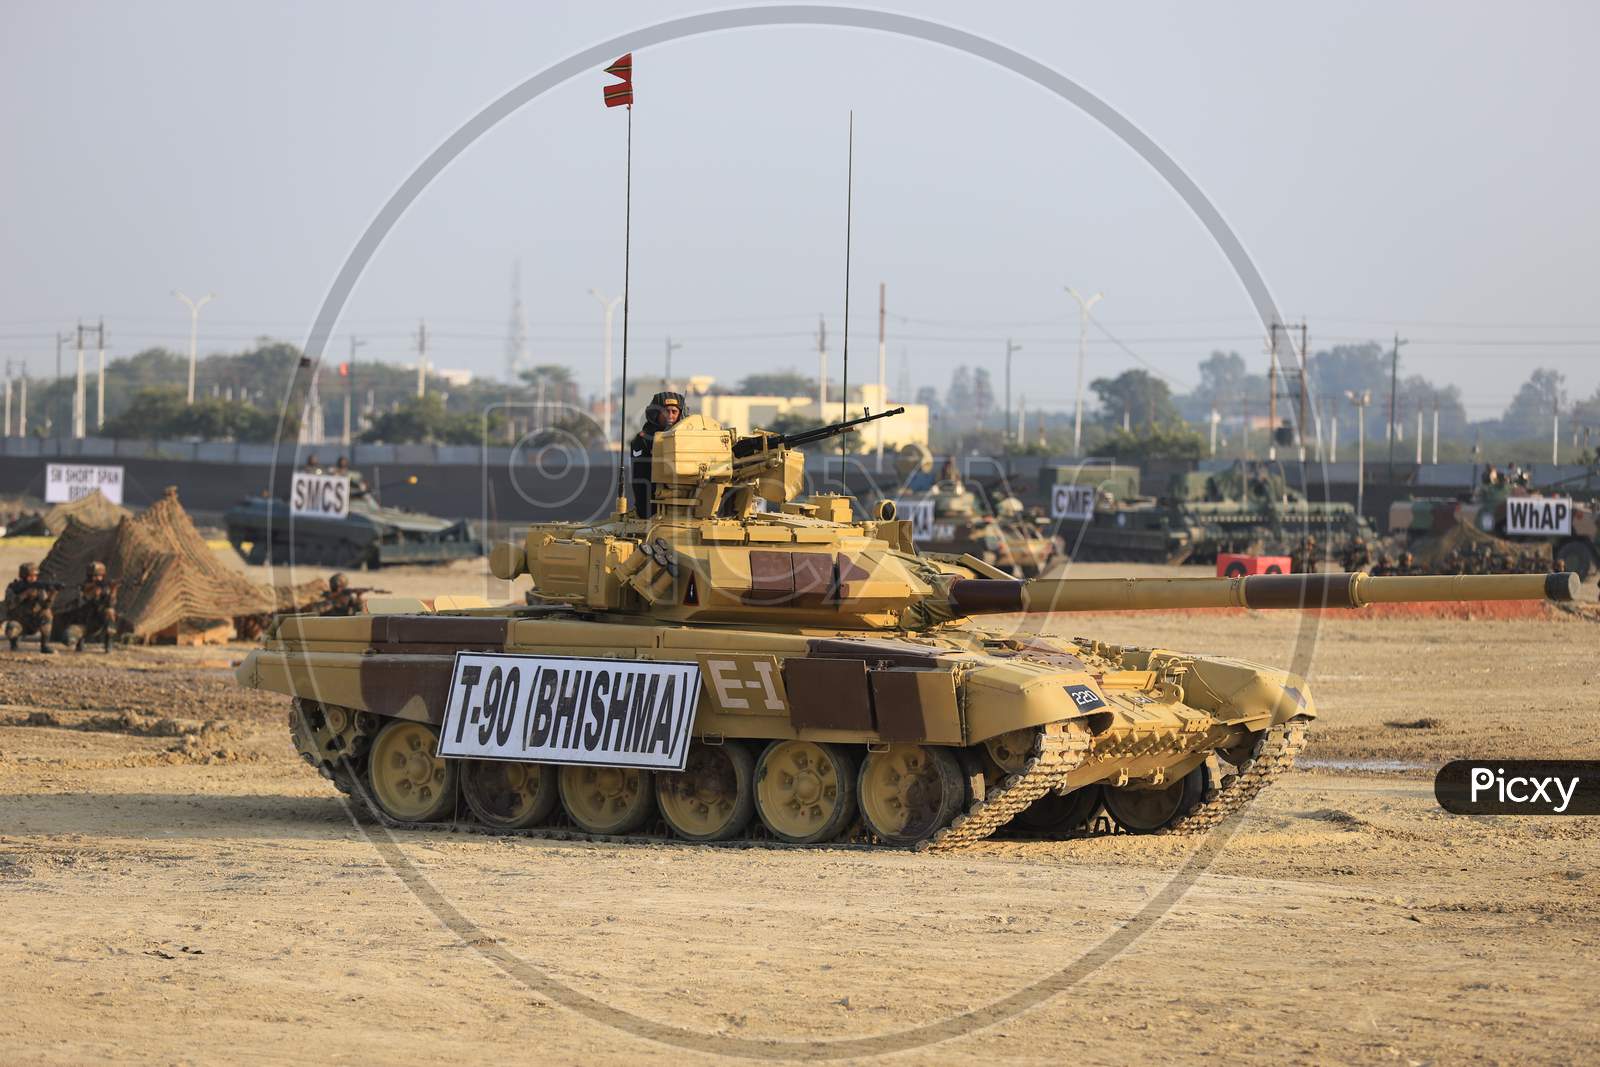 Indian Military Heavy Artillery  Truck Or Tanks Bhishma  at Defence Expo Event DefExpo 2020 In Lucknow , Uttar Pradesh